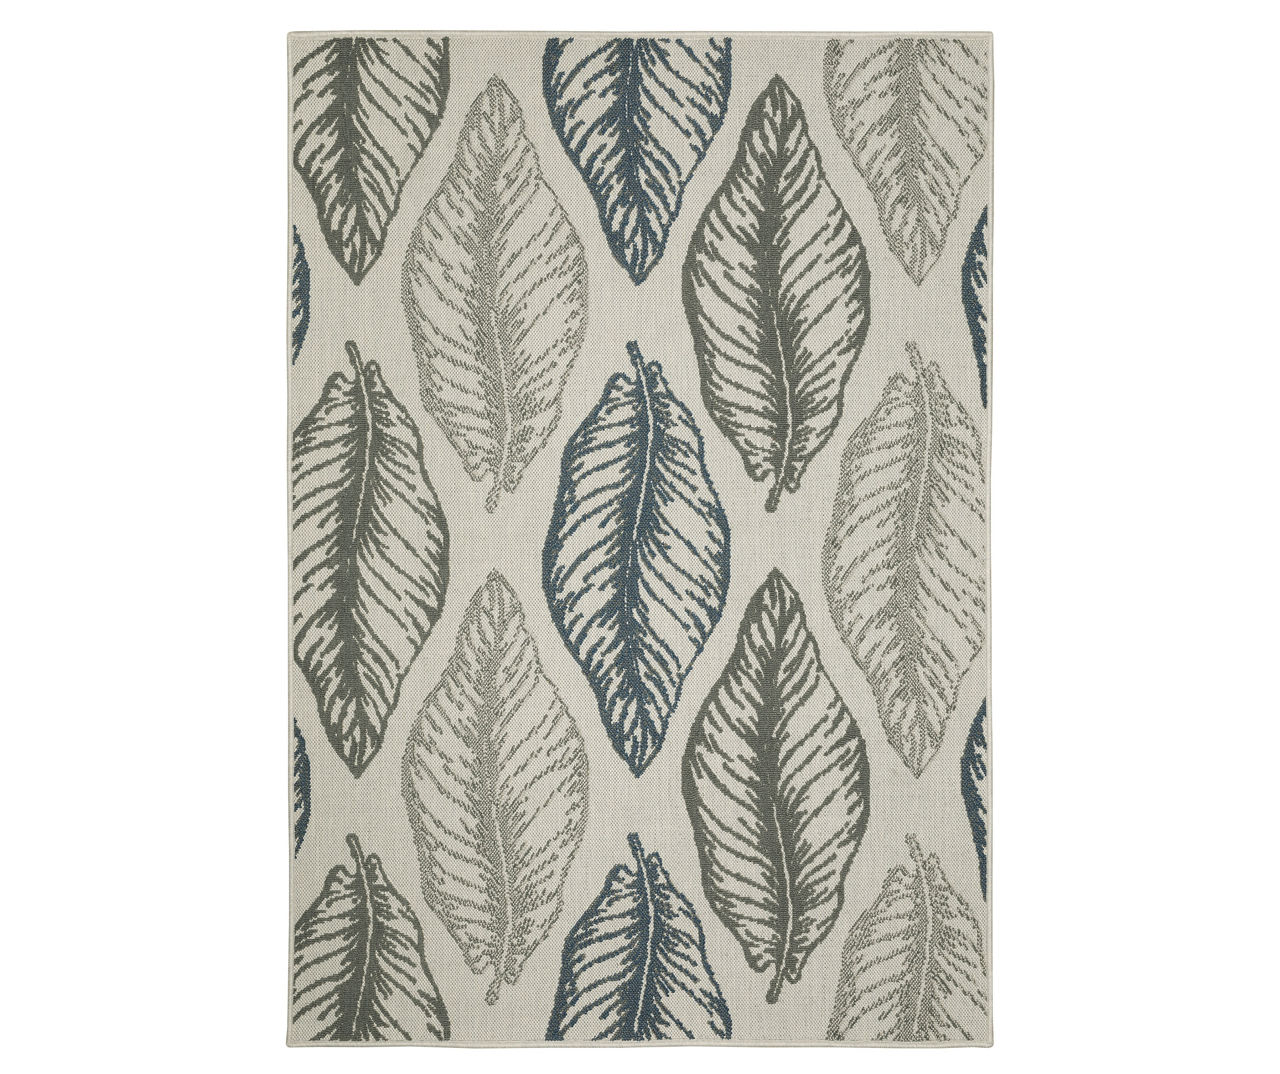 Torian Beige, Green & Blue Leaves Outdoor Area Rug, (7.1' x 10')